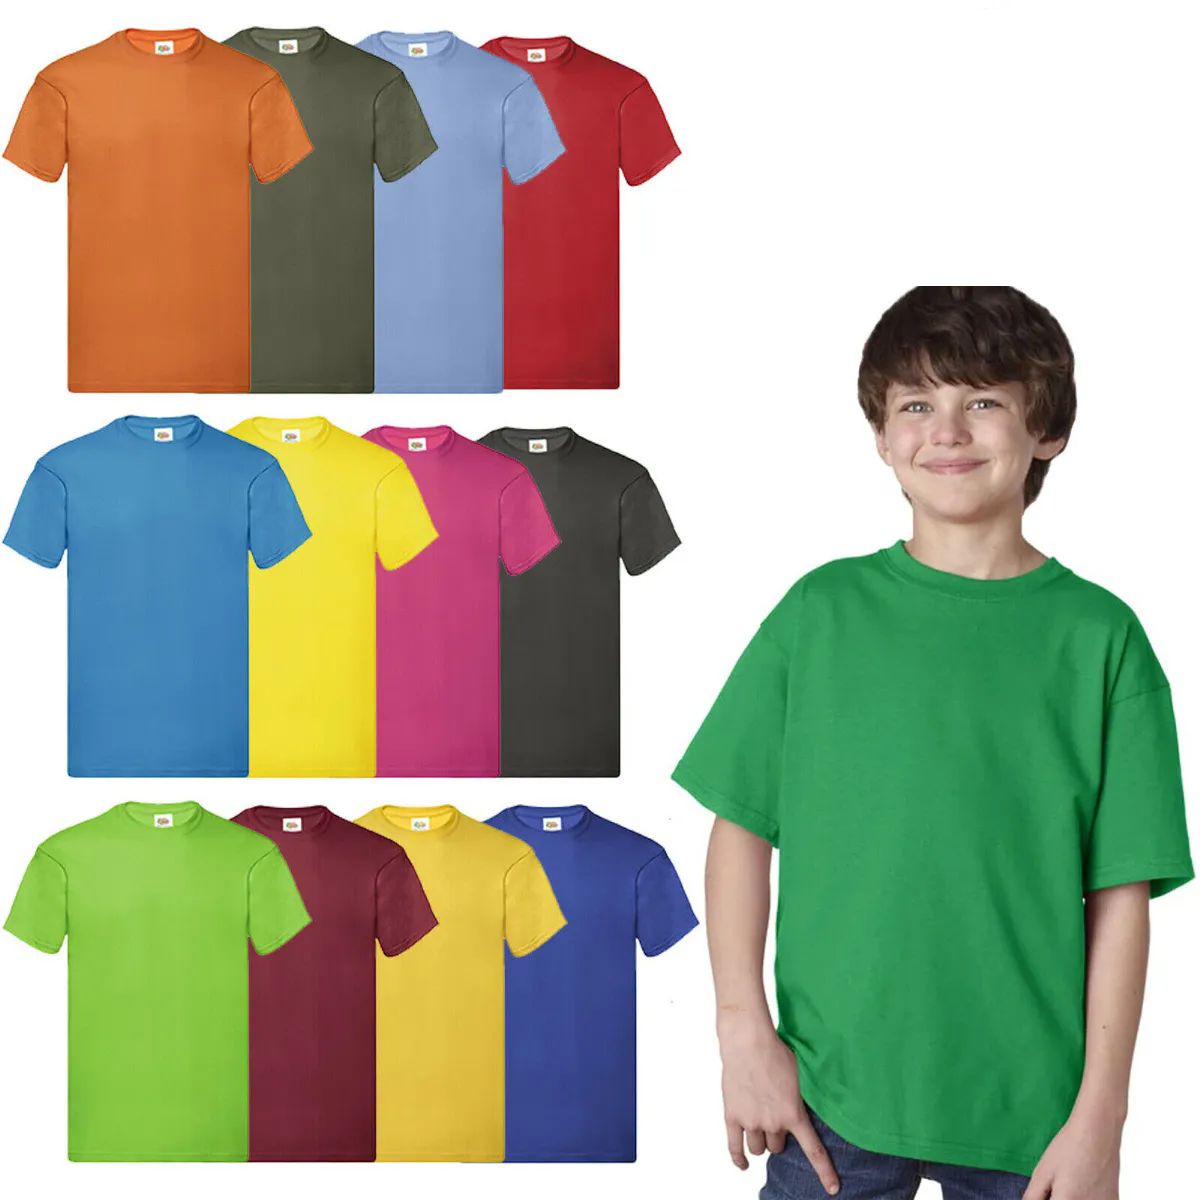 144 Pieces of Billion Hats Kids Youth Cotton Assorted Colors T Shirts Size S